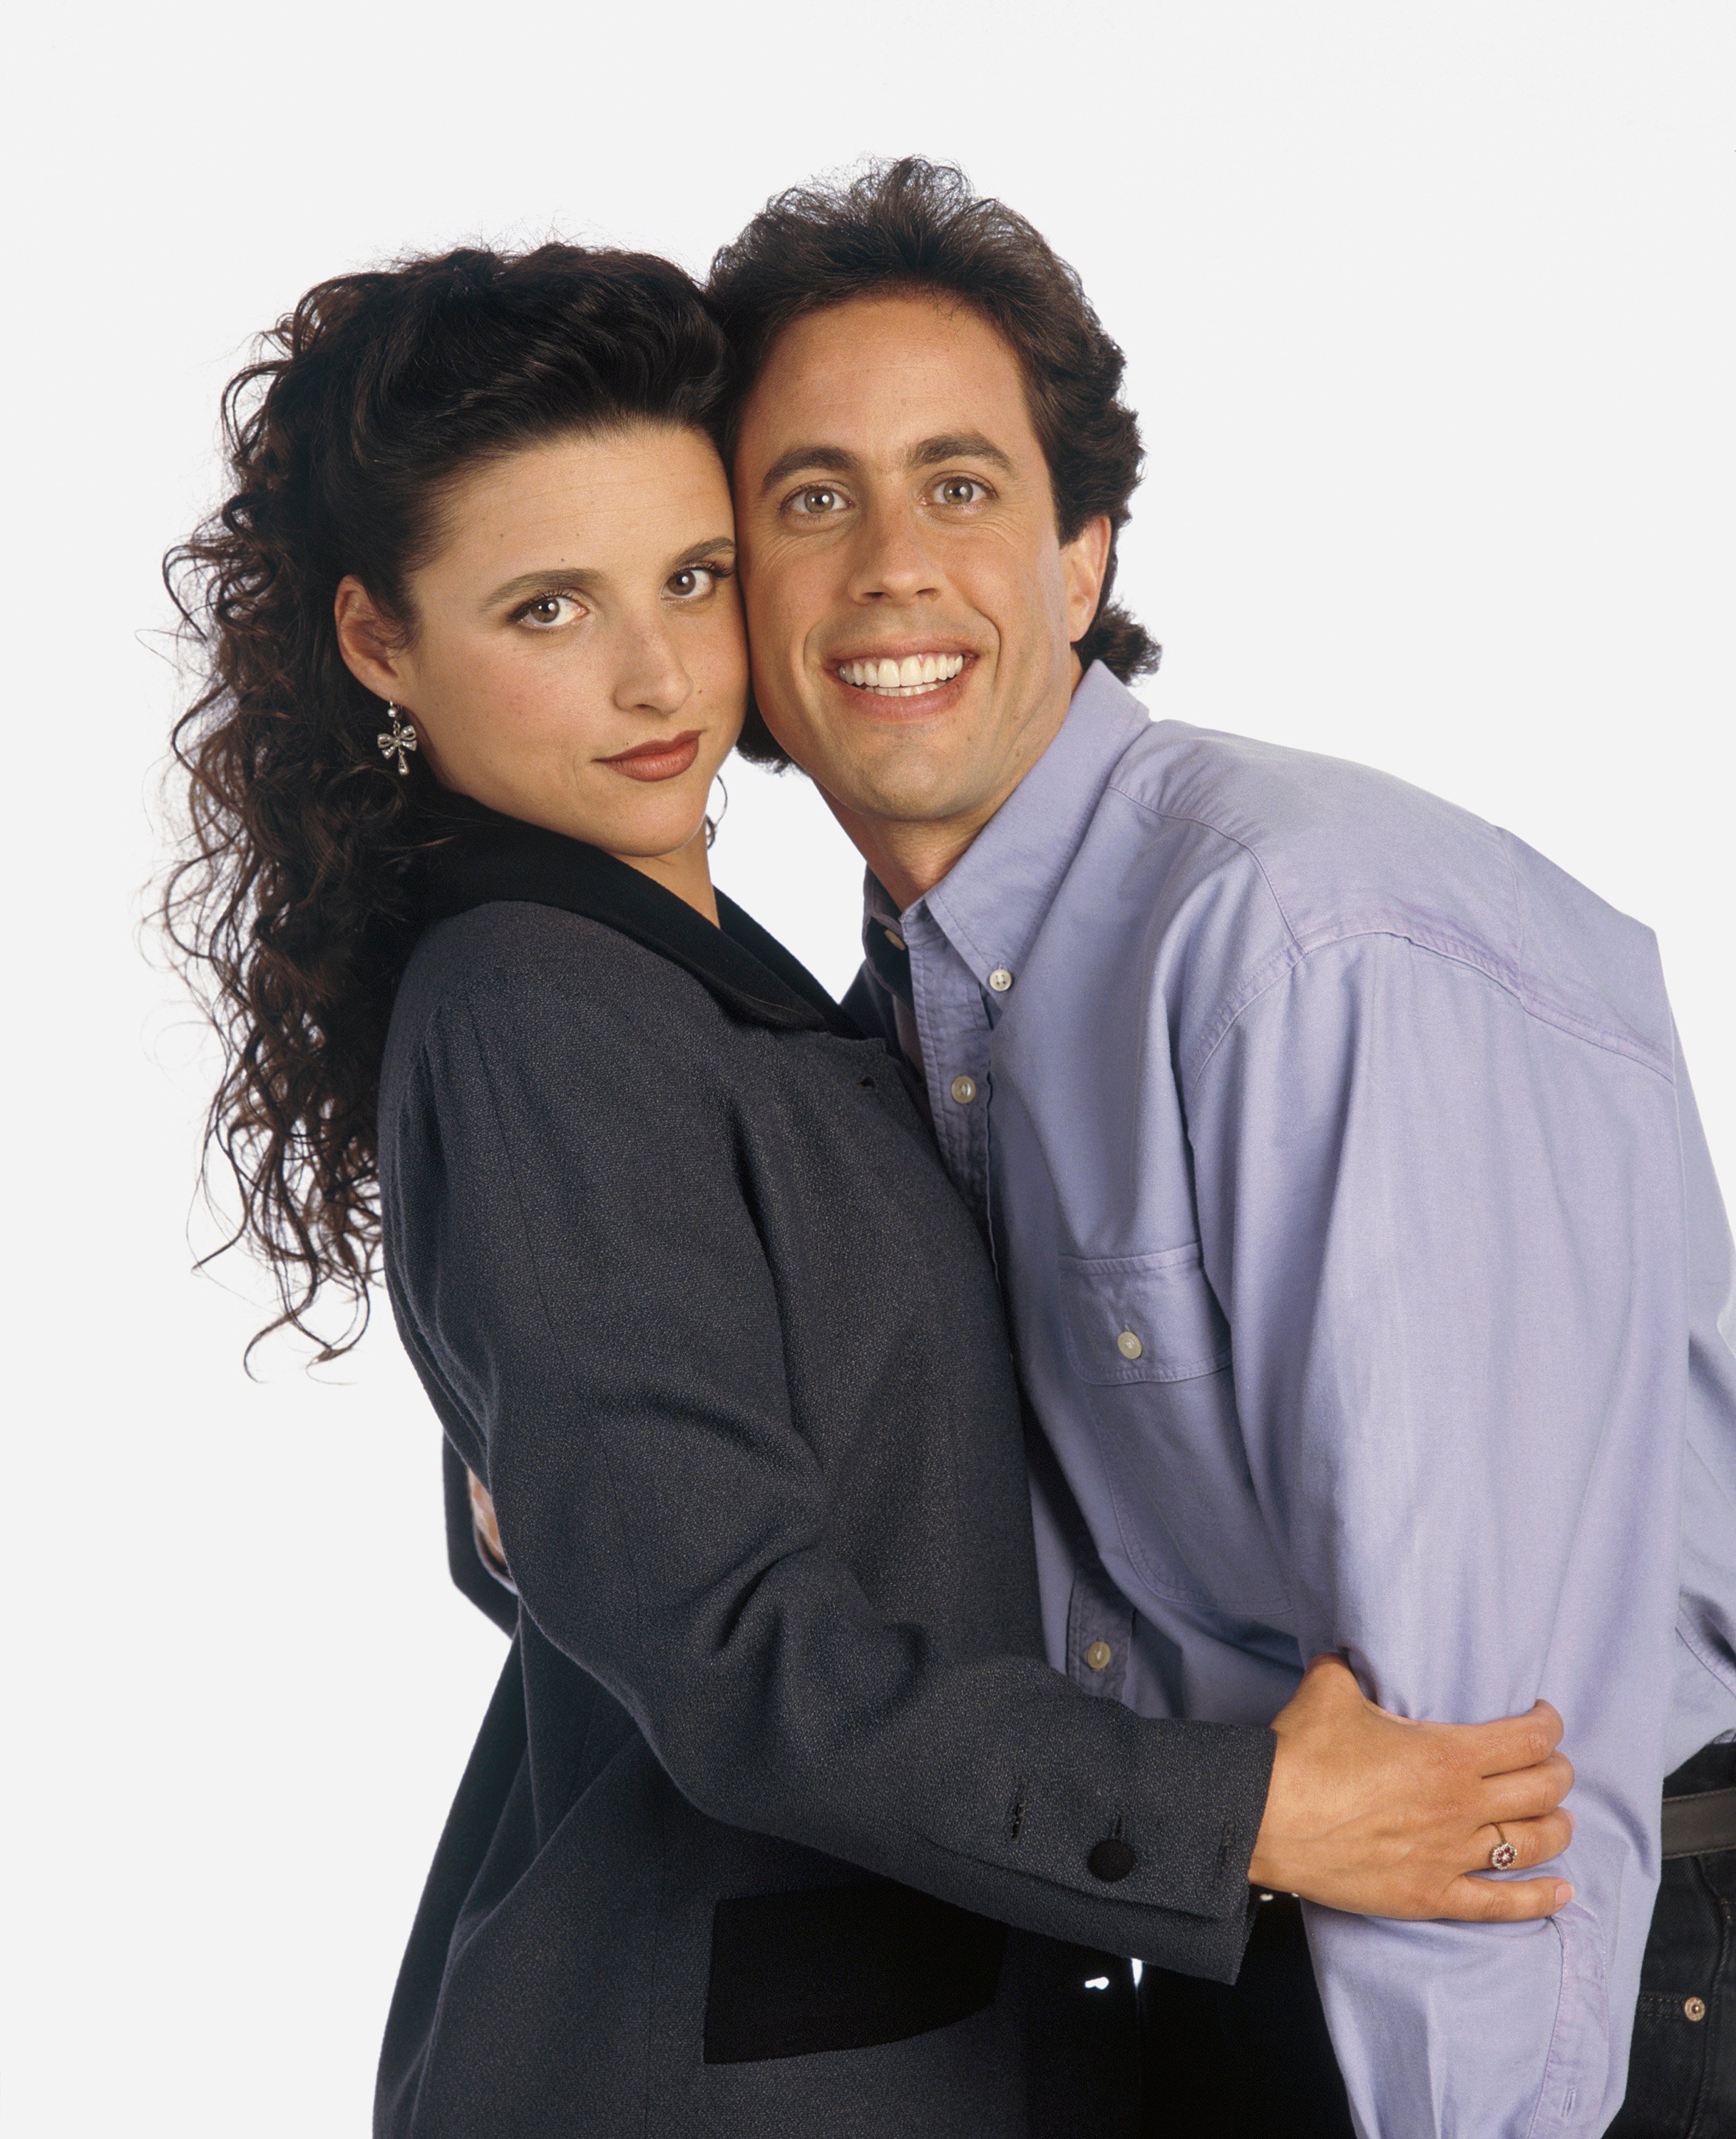 Julia Louis-Dreyfus as Elaine Benes and Jerry Seinfeld as Jerry Seinfeld 